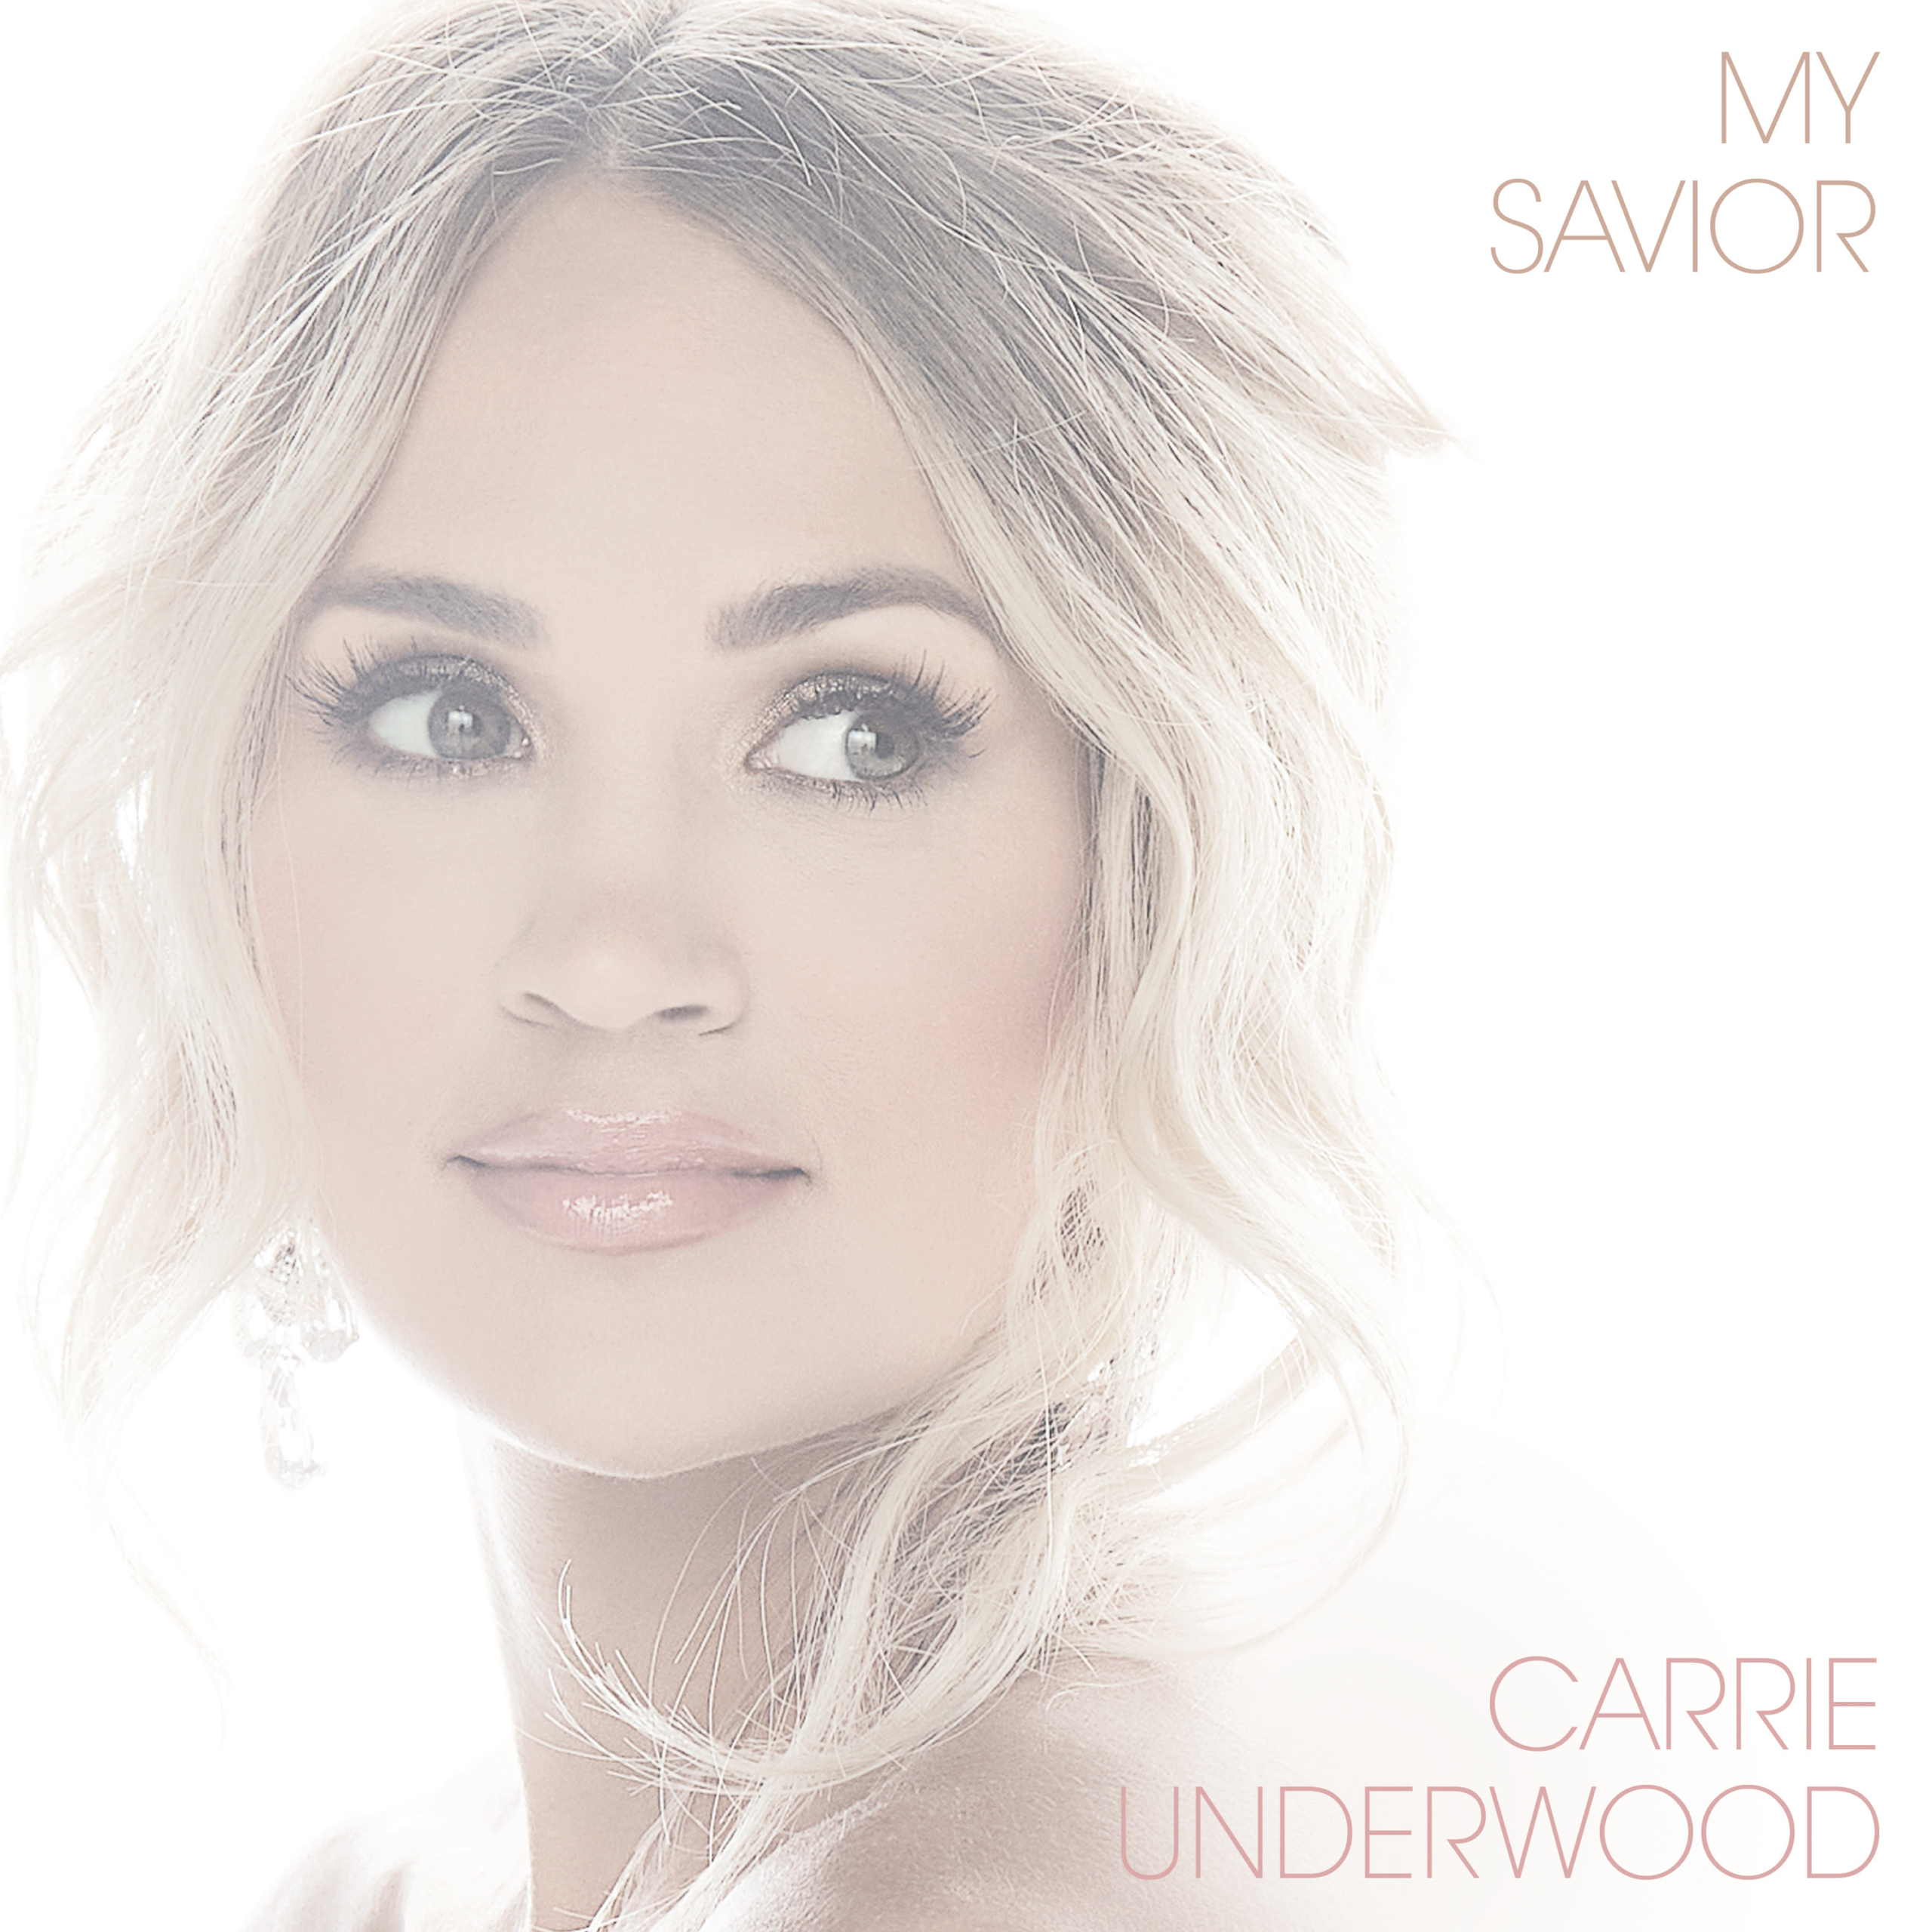 Carrie Underwood's 'My Savior' is due out March 26th